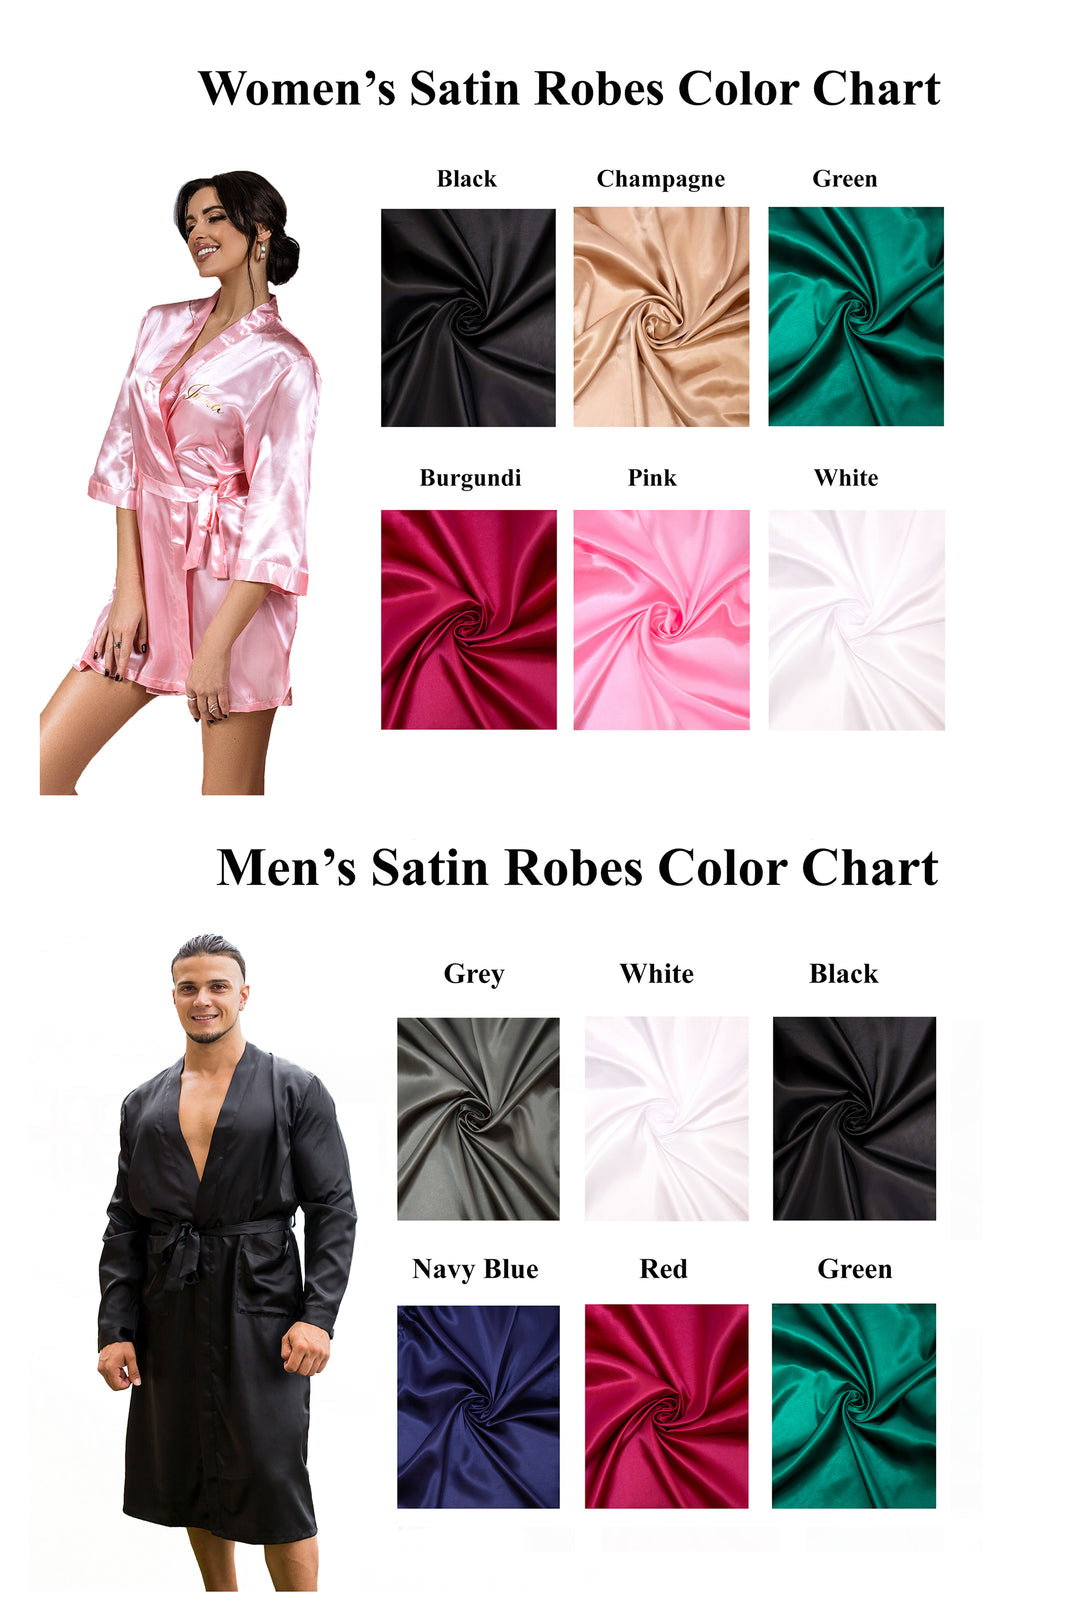 King and Queen Satin Robes